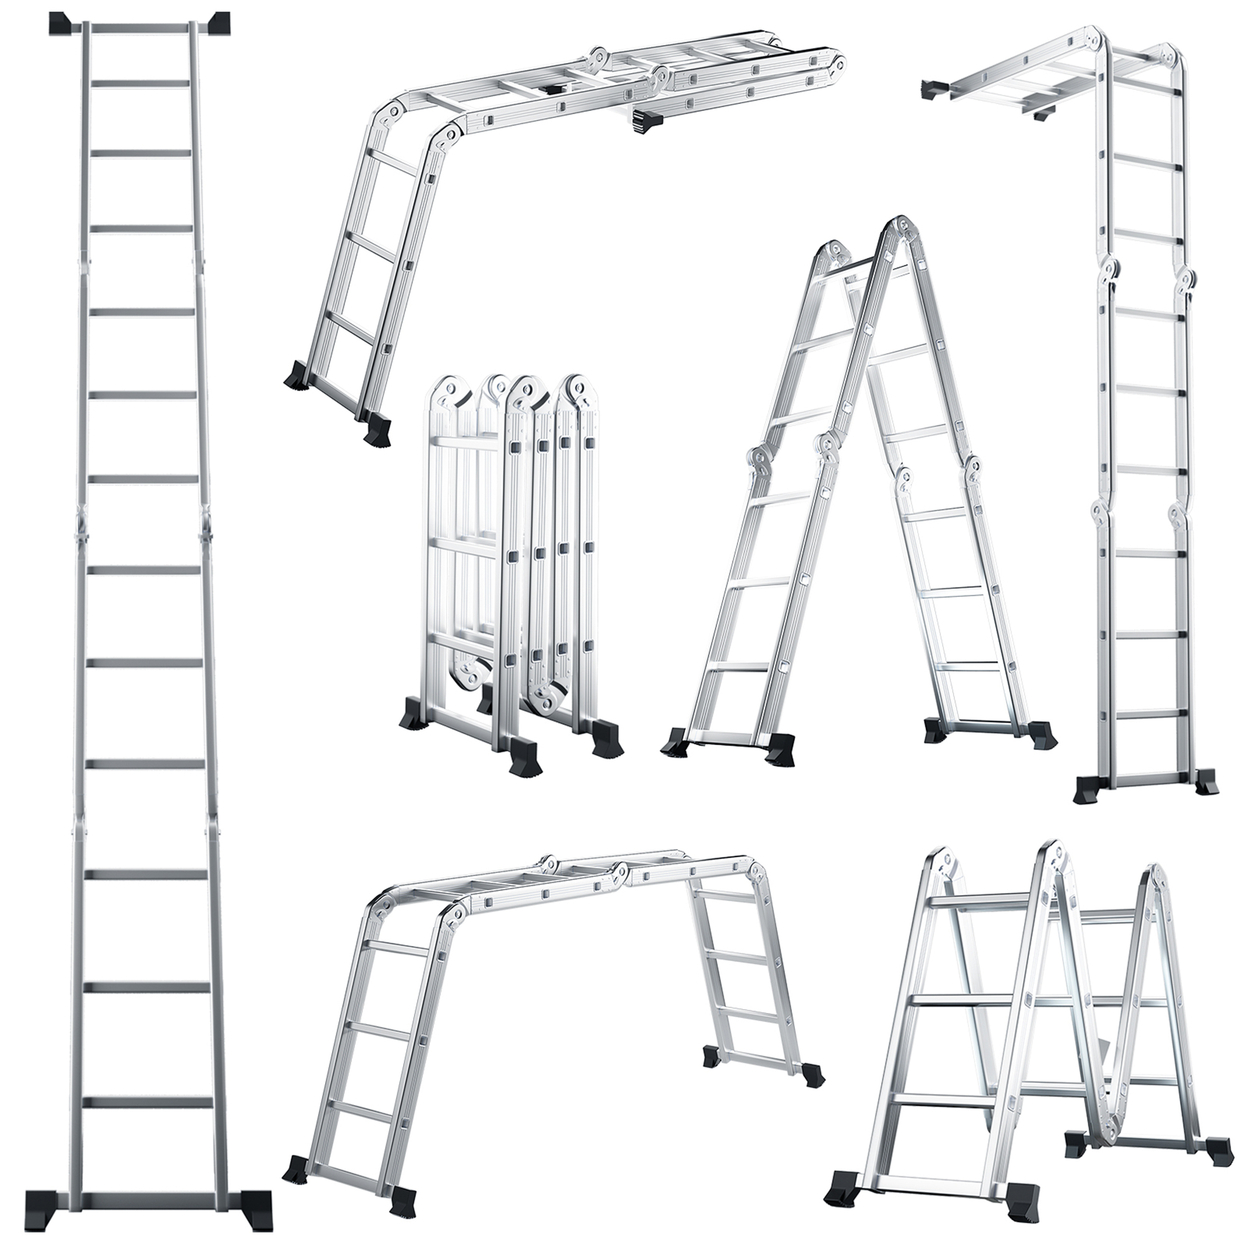 12 Ft Folding Step Ladder 7-in-1 Aluminium Alloy Extension Ladder Max Load 330 Lbs